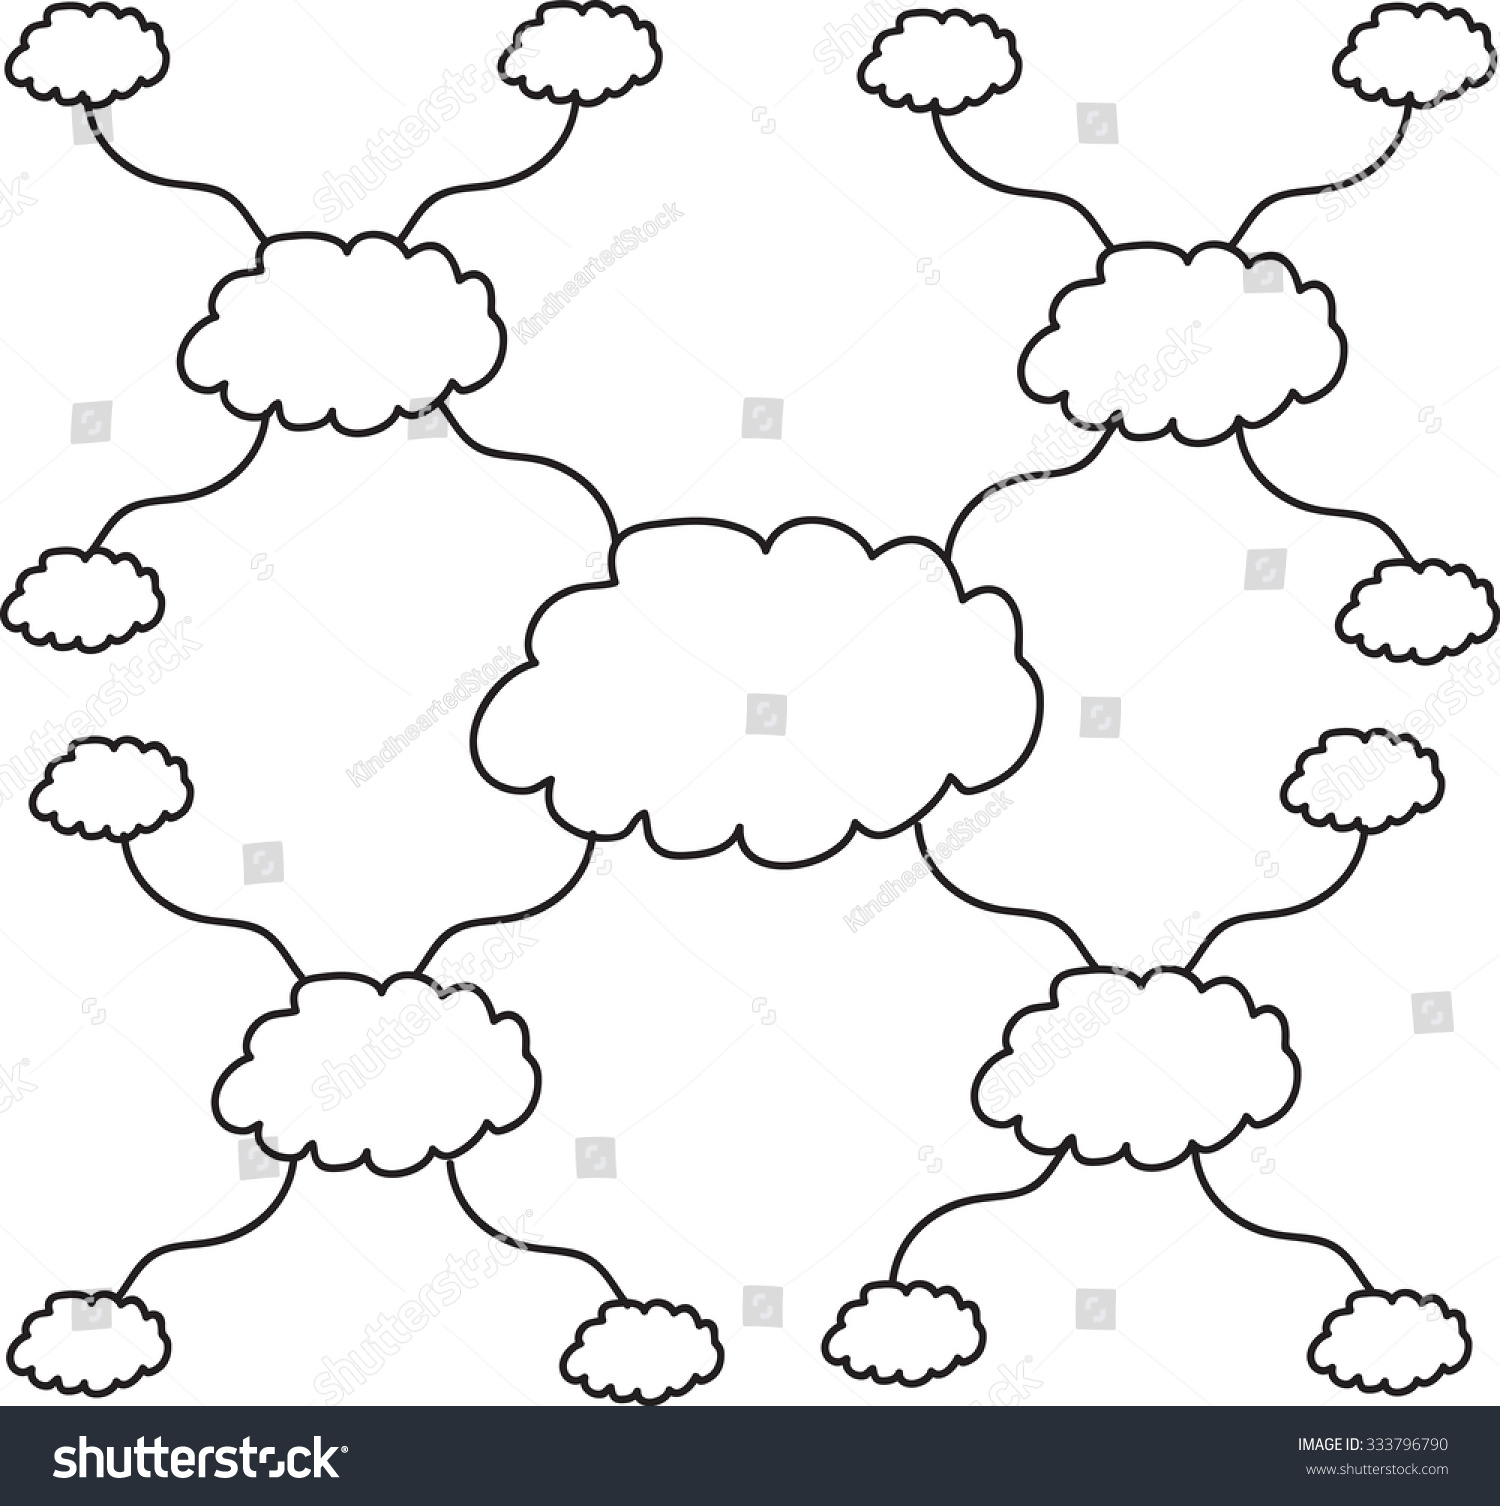 Cloud Mind Mapping Model, Flow Chart Template Stock Vector 333796790 ...